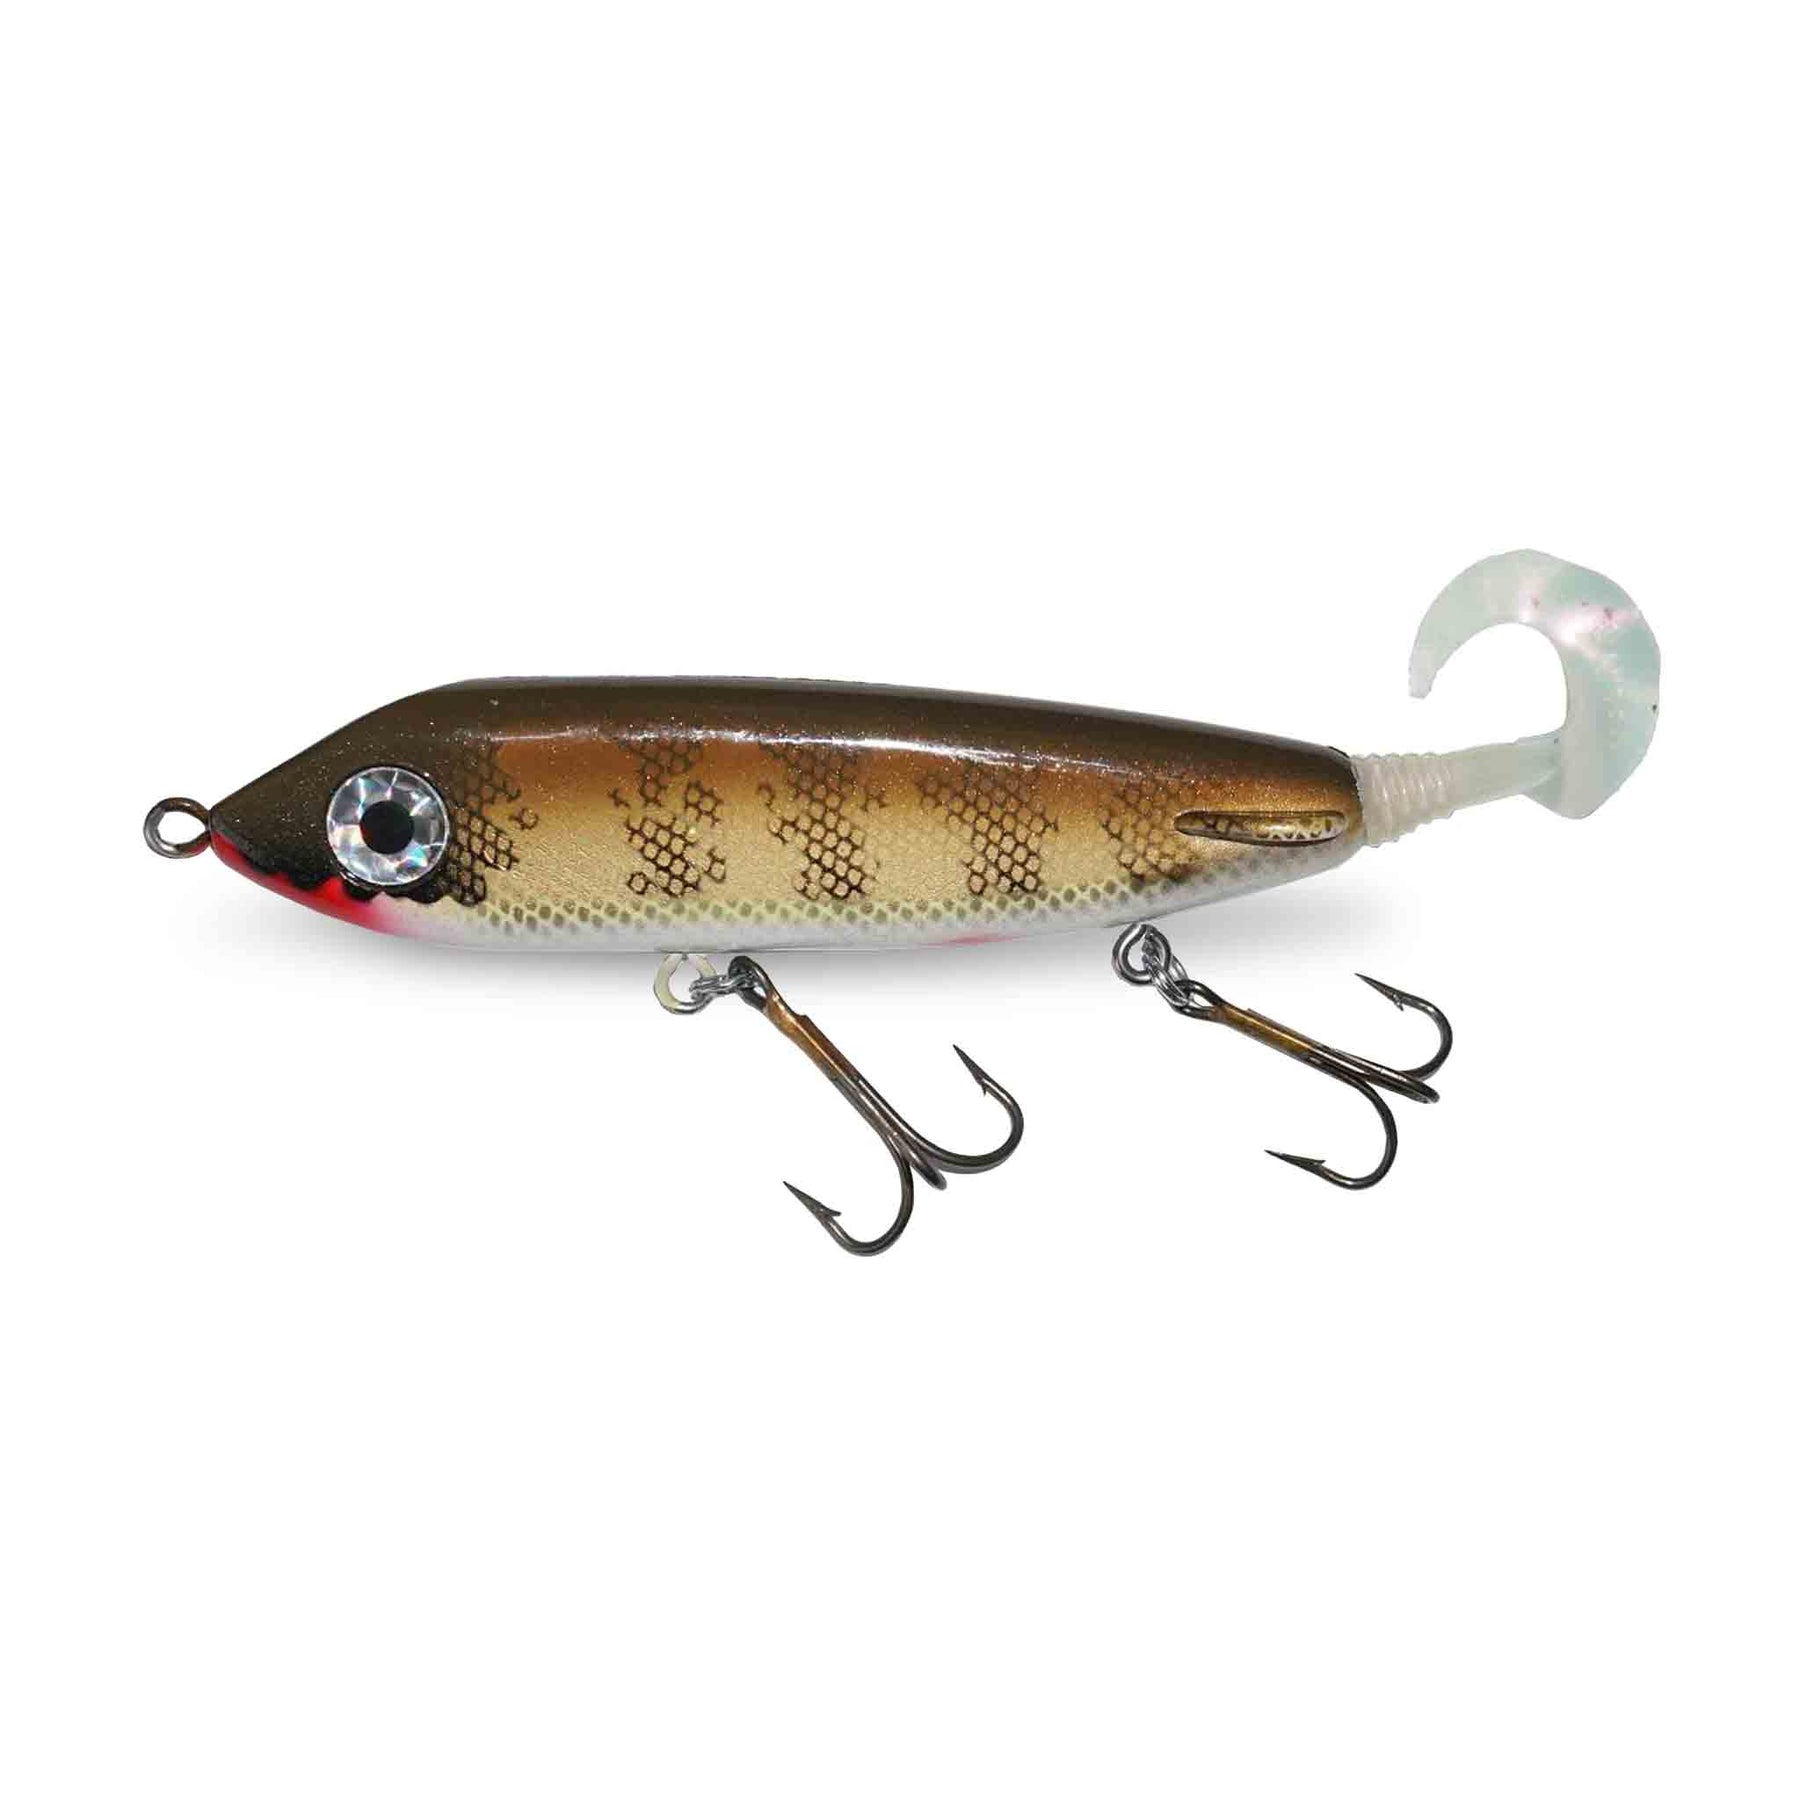 View of Jerk-Glide_Baits ERC Squirrelly Hell Hound 9'' Glide Bait Walleye available at EZOKO Pike and Musky Shop